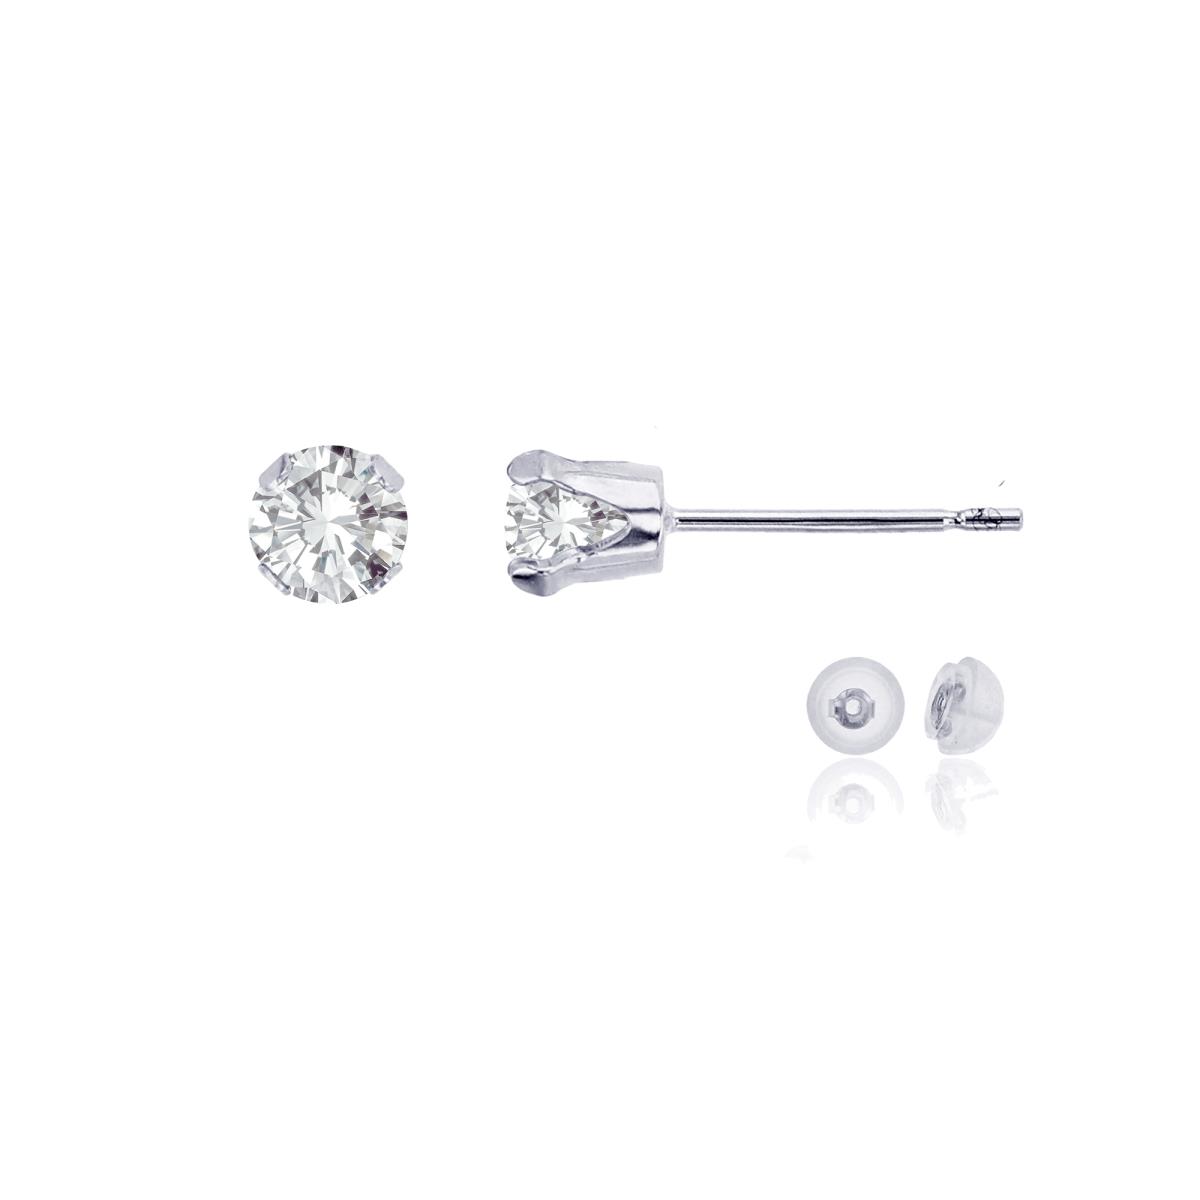 10K White Gold 4mm Round White Topaz Stud Earring with Silicone Back